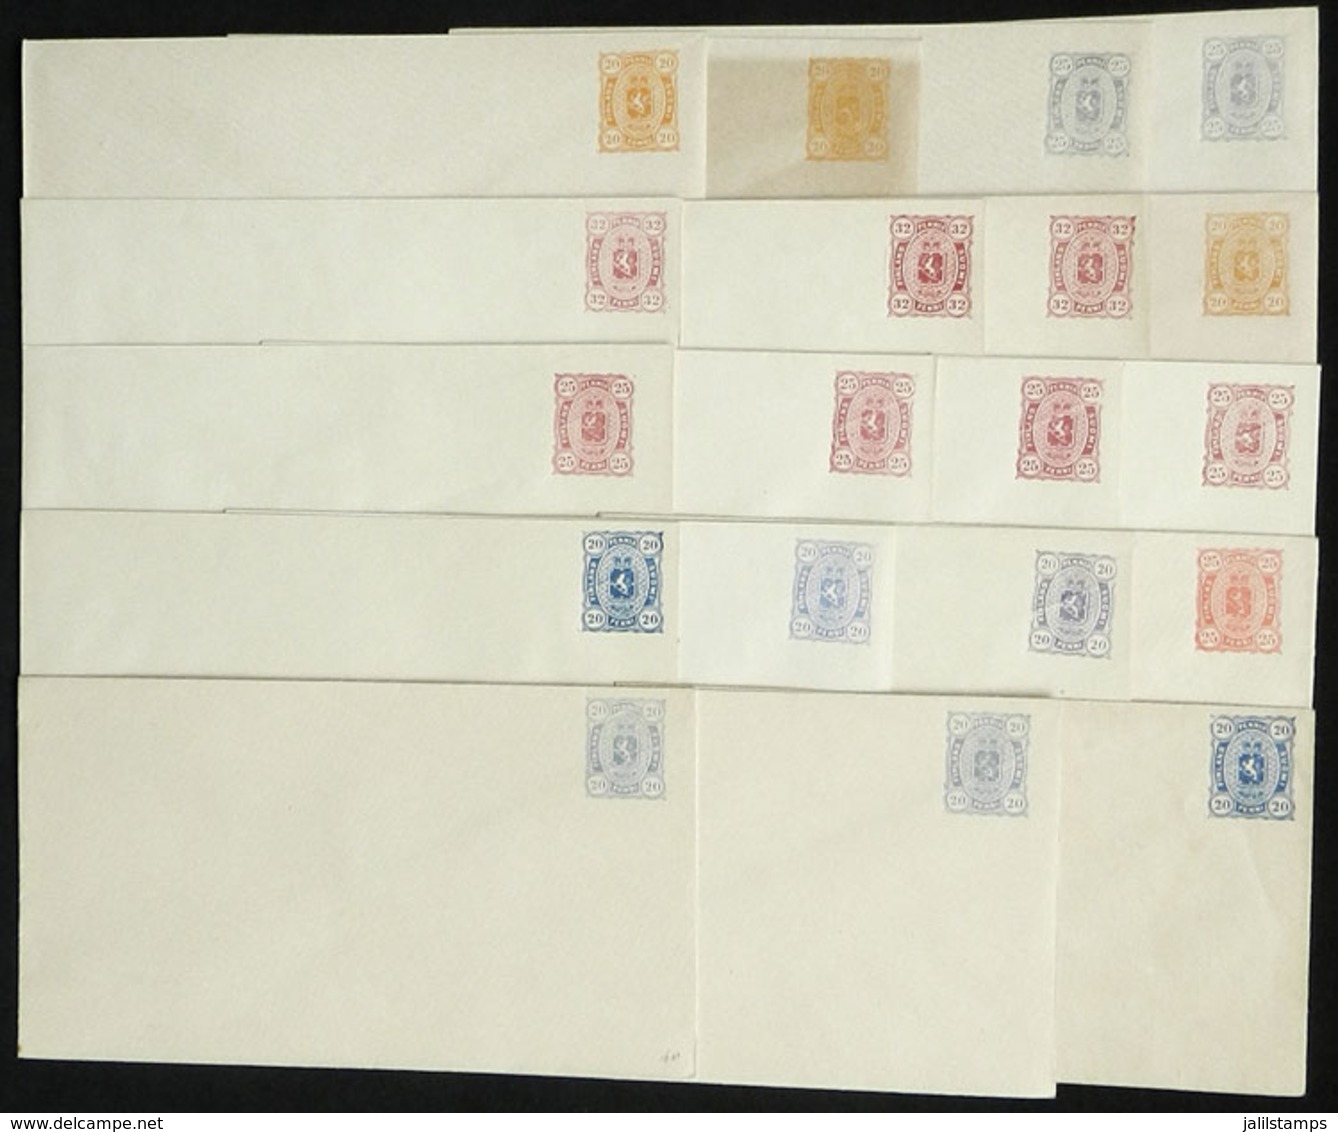 FINLAND: 20 Very Old Stationery Envelopes, Unused, Excellent Quality. There Are Different Colors, Some Rare, High Catalo - Interi Postali